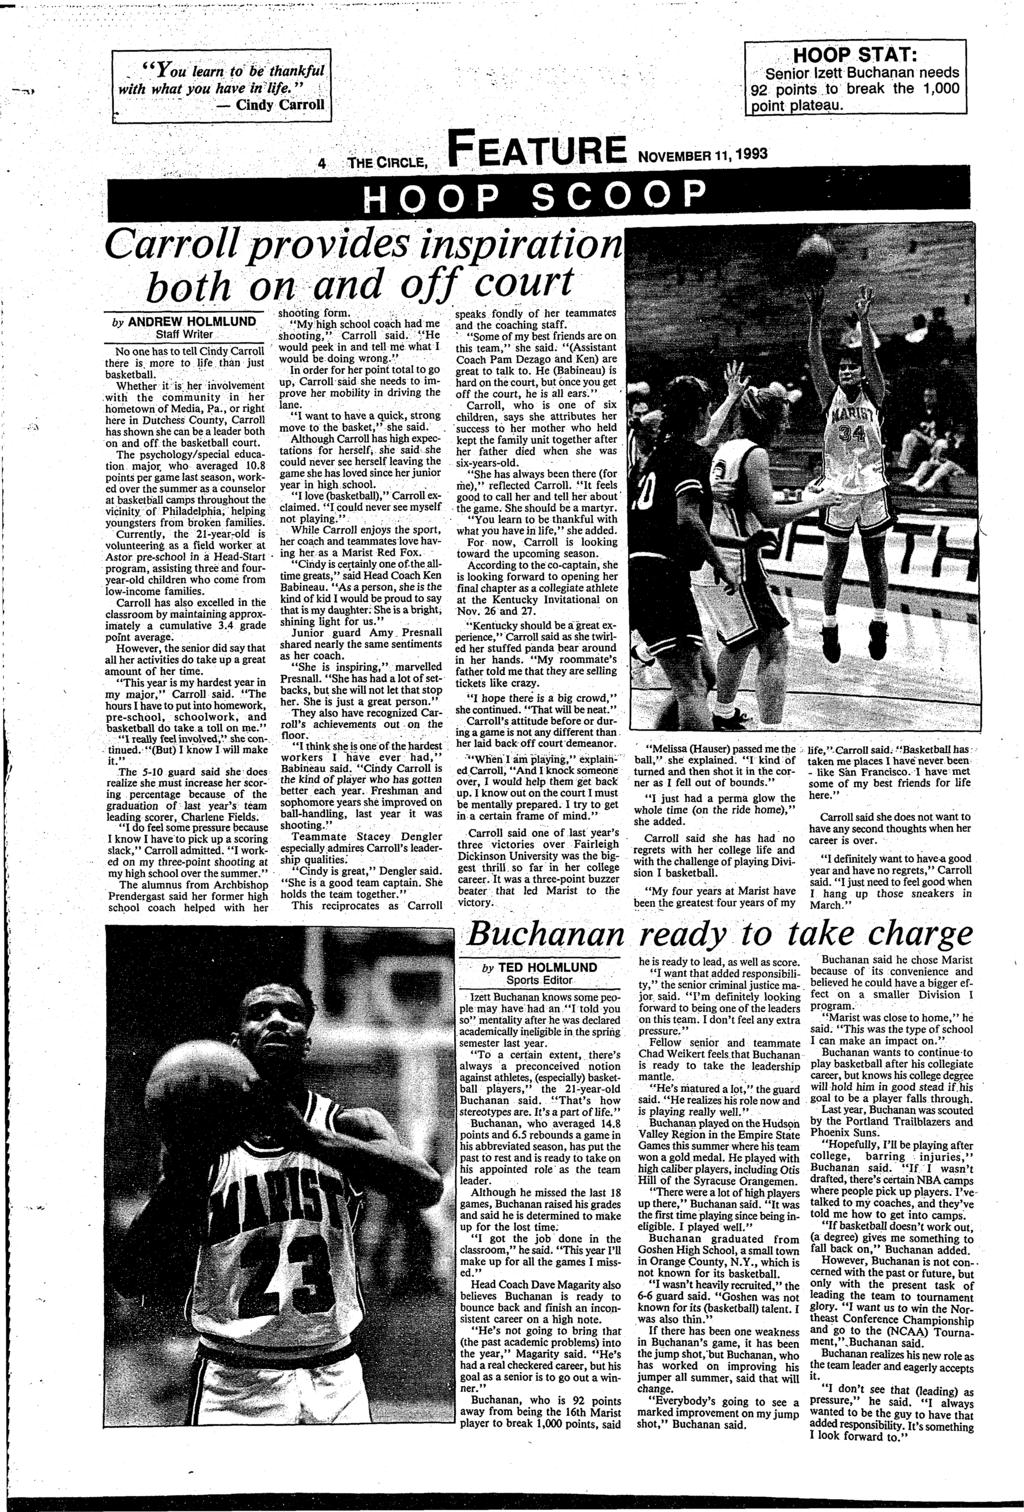 ' - ; \, ' * You learn to be thankful wth what you have n lfe" Cndy Carroll HOOP STAT: Senor zett Buchanan needs 92 ponts to break the 1,000 pont plateau 4 THE CRCLE, HOOP NOVEMBER 11,1993 SCOOP both